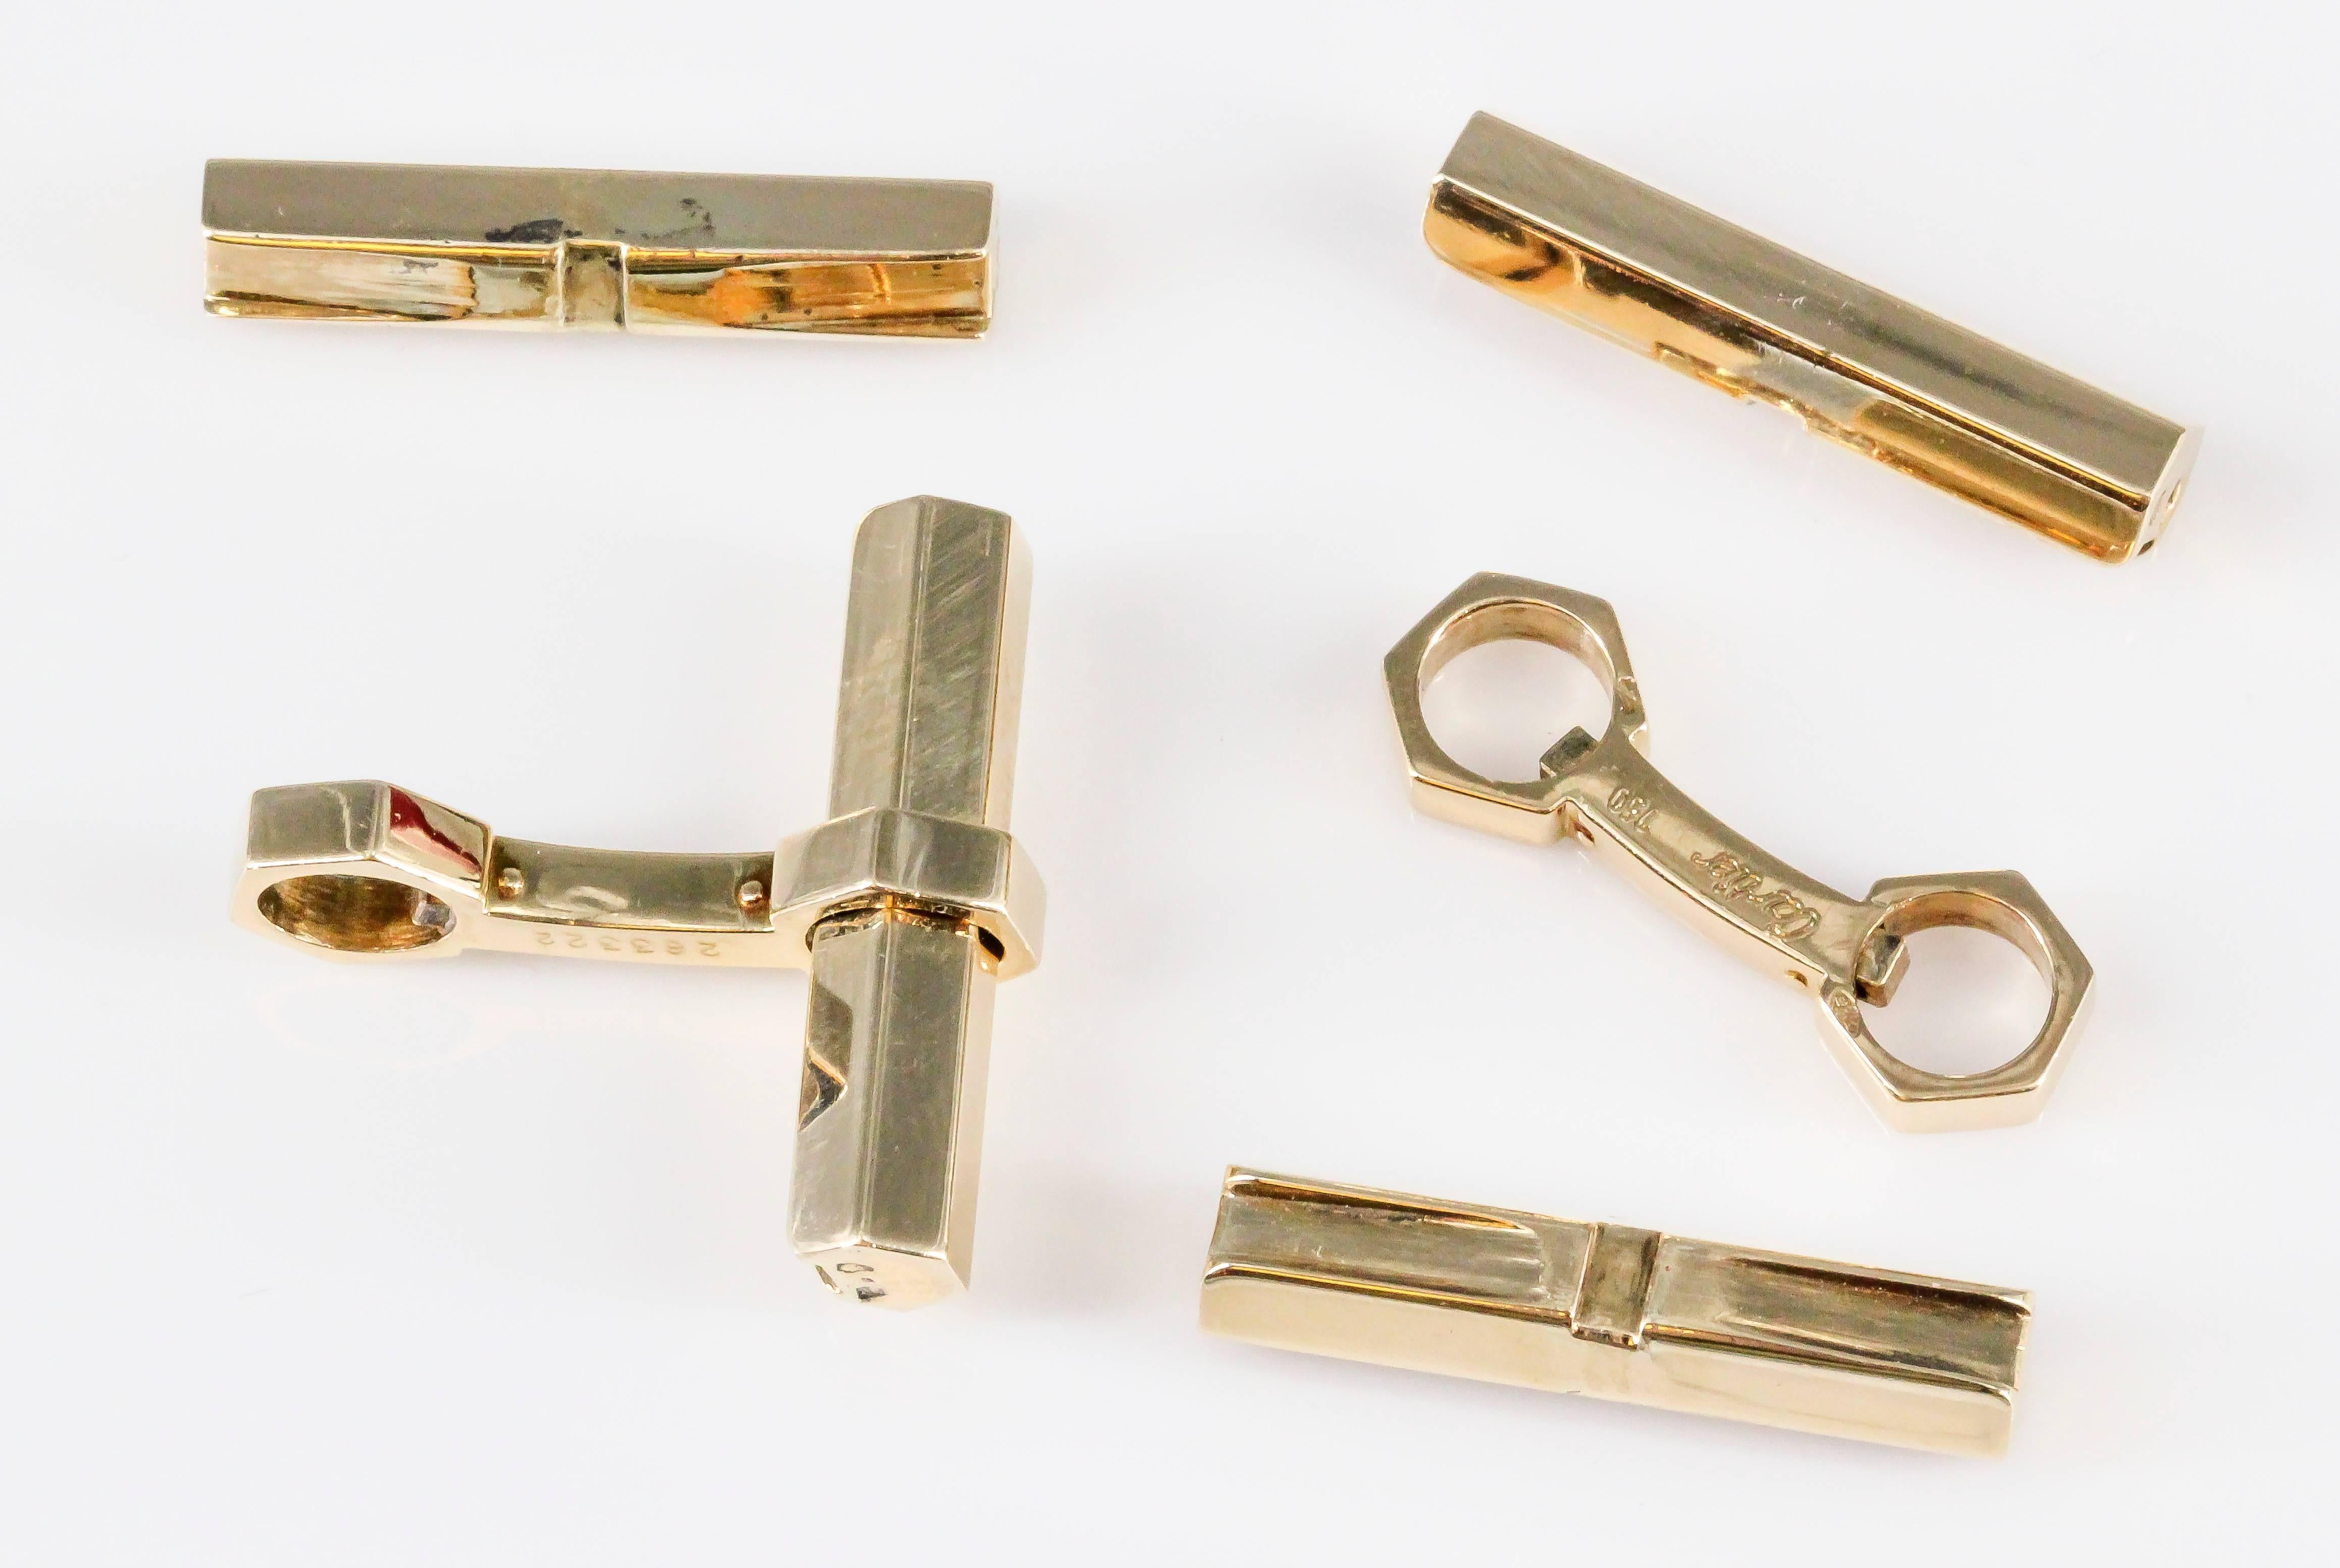 Rare and unusual 18K yellow gold bar cufflinks by Cartier. They feature a hexagonal design bar which makes them much more scarce than the usual round or even square design bar. Bars are removable for easier wear.
Hallmarks: Cartier, reference